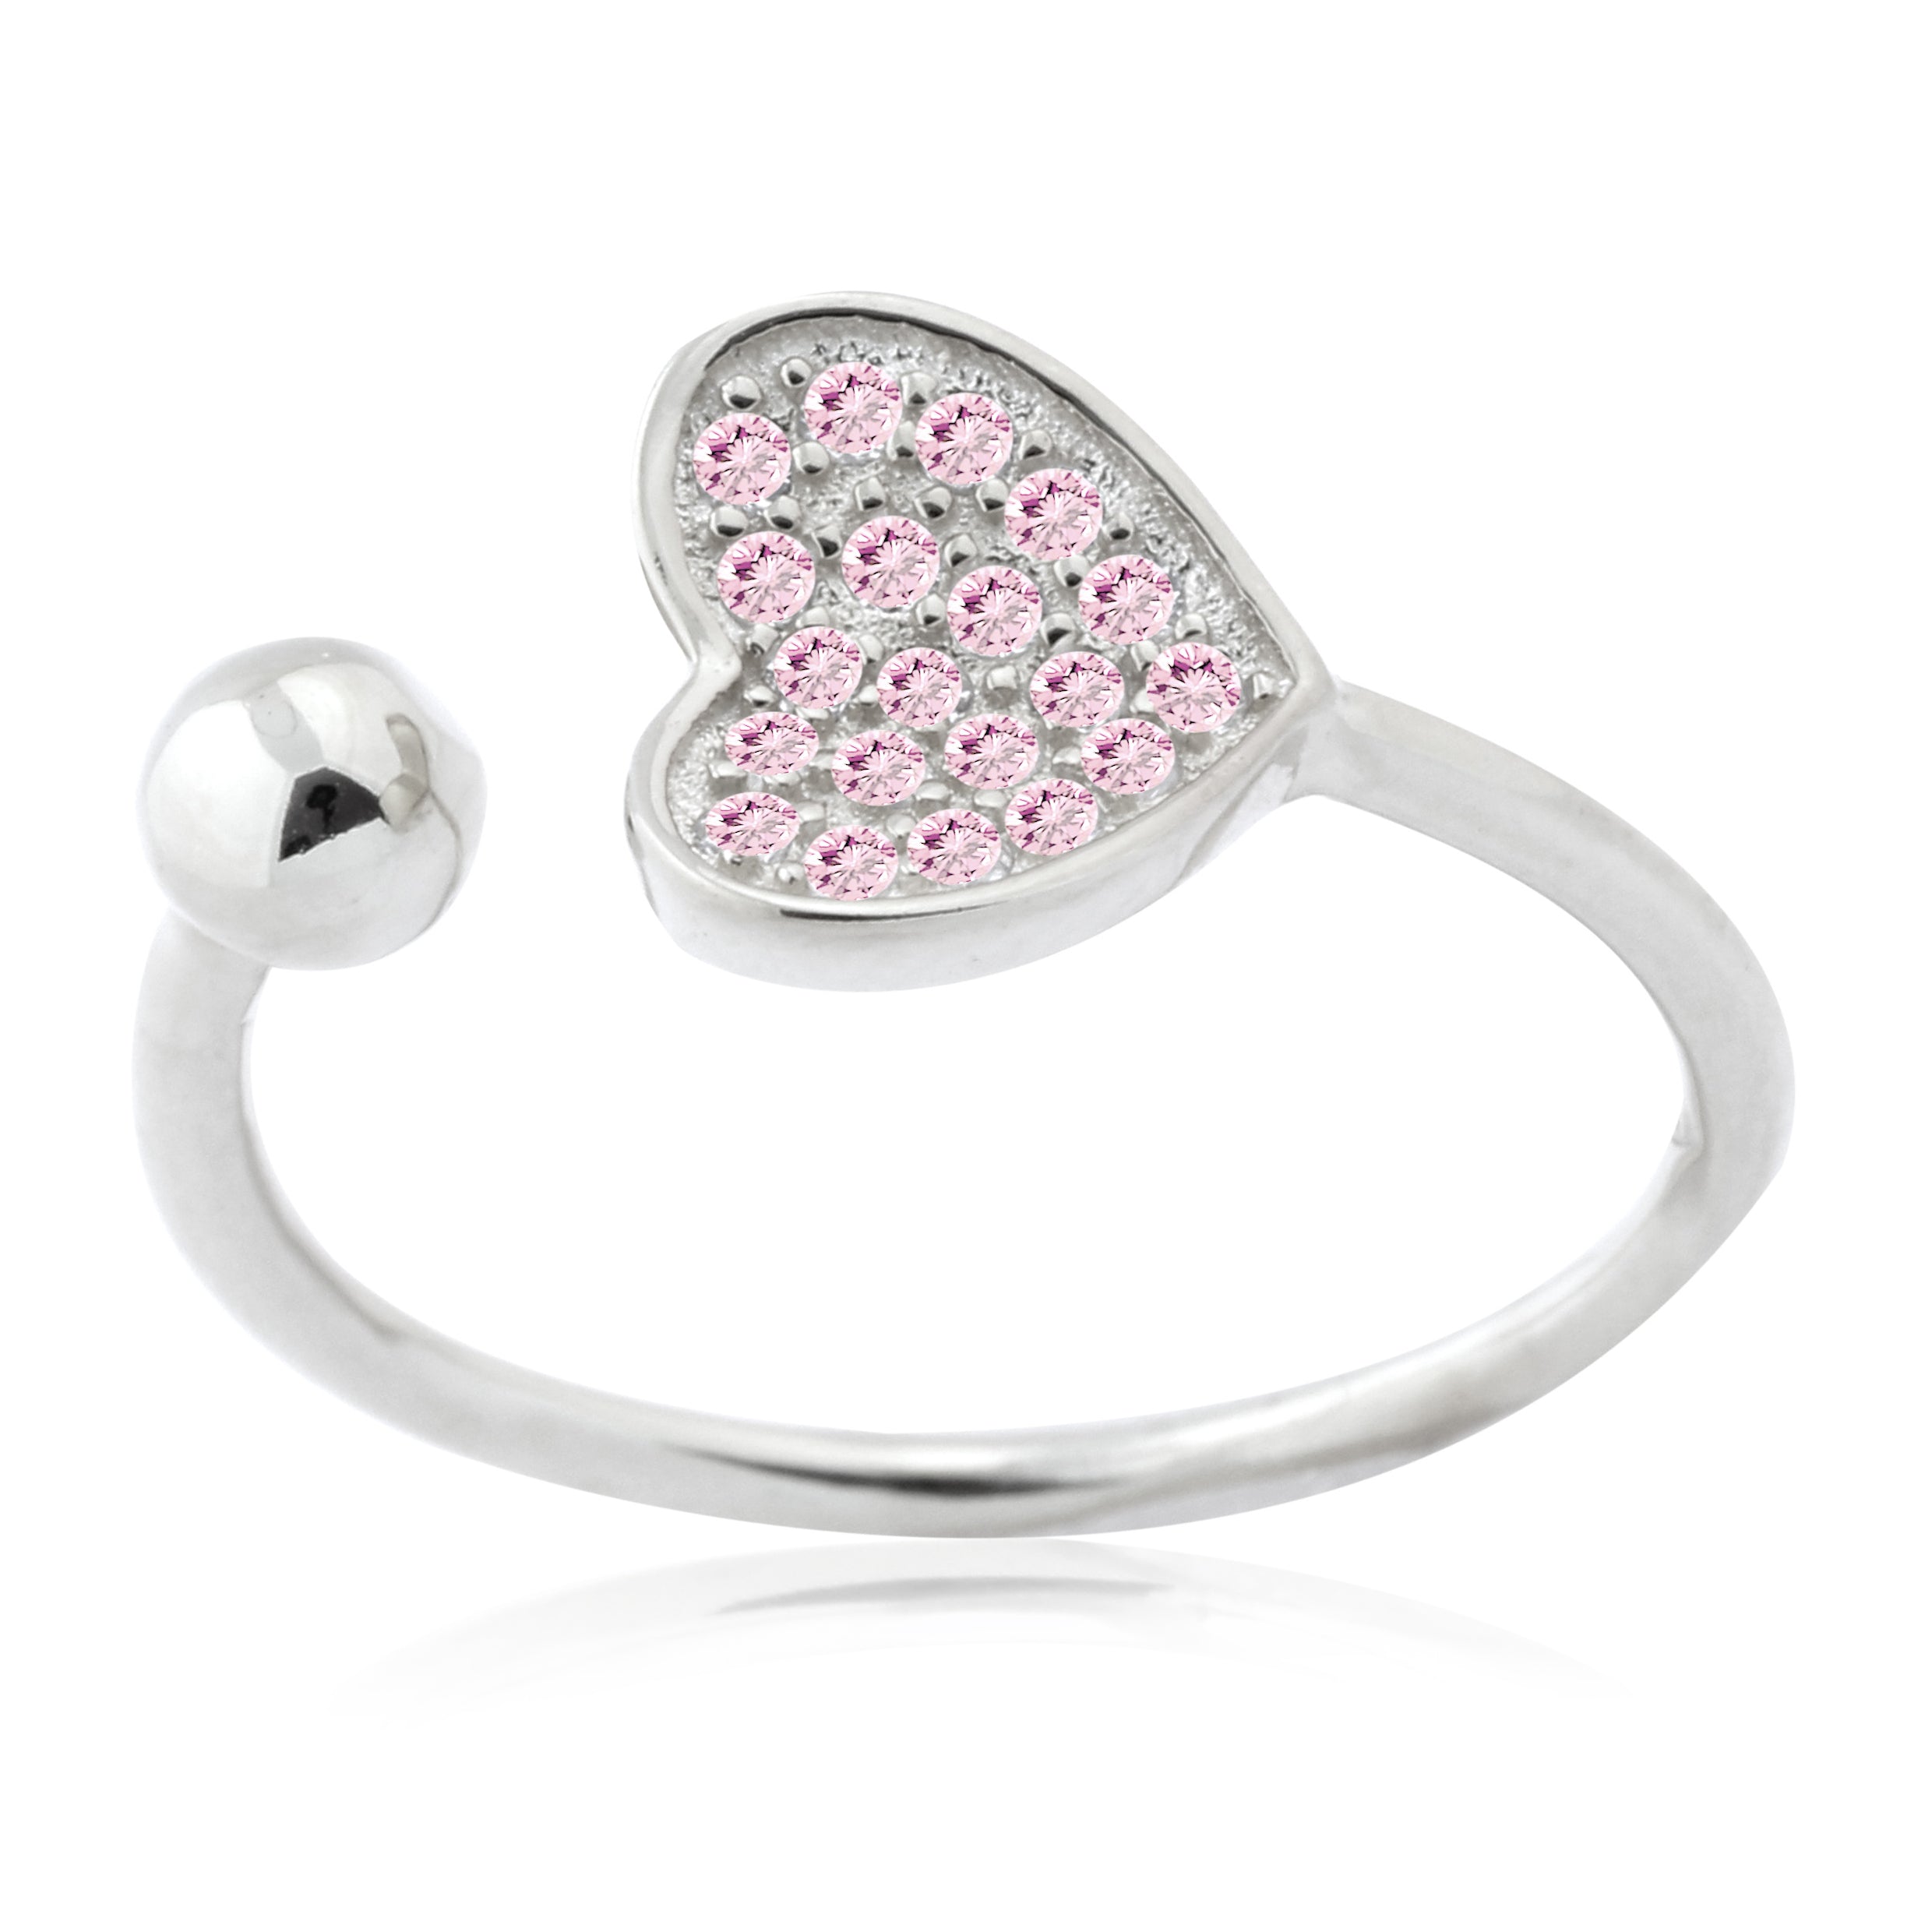 Adjustable Heart Ring in Sterling Silver Pavé with CZ